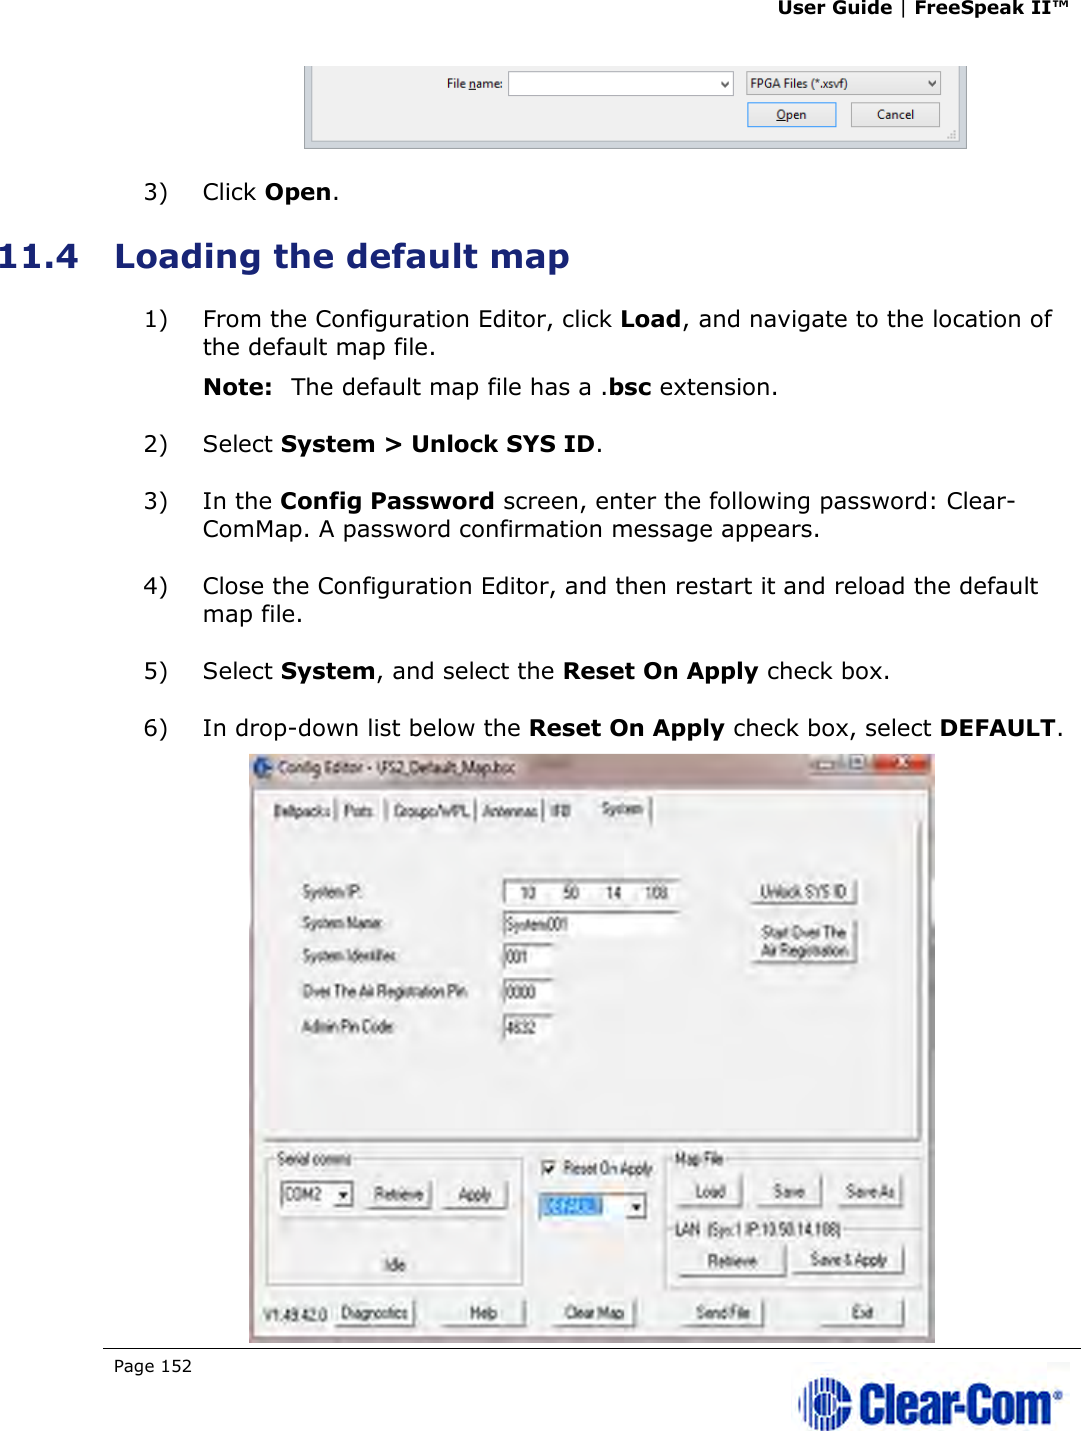 User Guide | FreeSpeak II™  Page 152    3) Click Open. 11.4 Loading the default map 1) From the Configuration Editor, click Load, and navigate to the location of the default map file.  Note: The default map file has a .bsc extension. 2) Select System &gt; Unlock SYS ID. 3) In the Config Password screen, enter the following password: Clear-ComMap. A password confirmation message appears. 4) Close the Configuration Editor, and then restart it and reload the default map file. 5) Select System, and select the Reset On Apply check box. 6) In drop-down list below the Reset On Apply check box, select DEFAULT.  